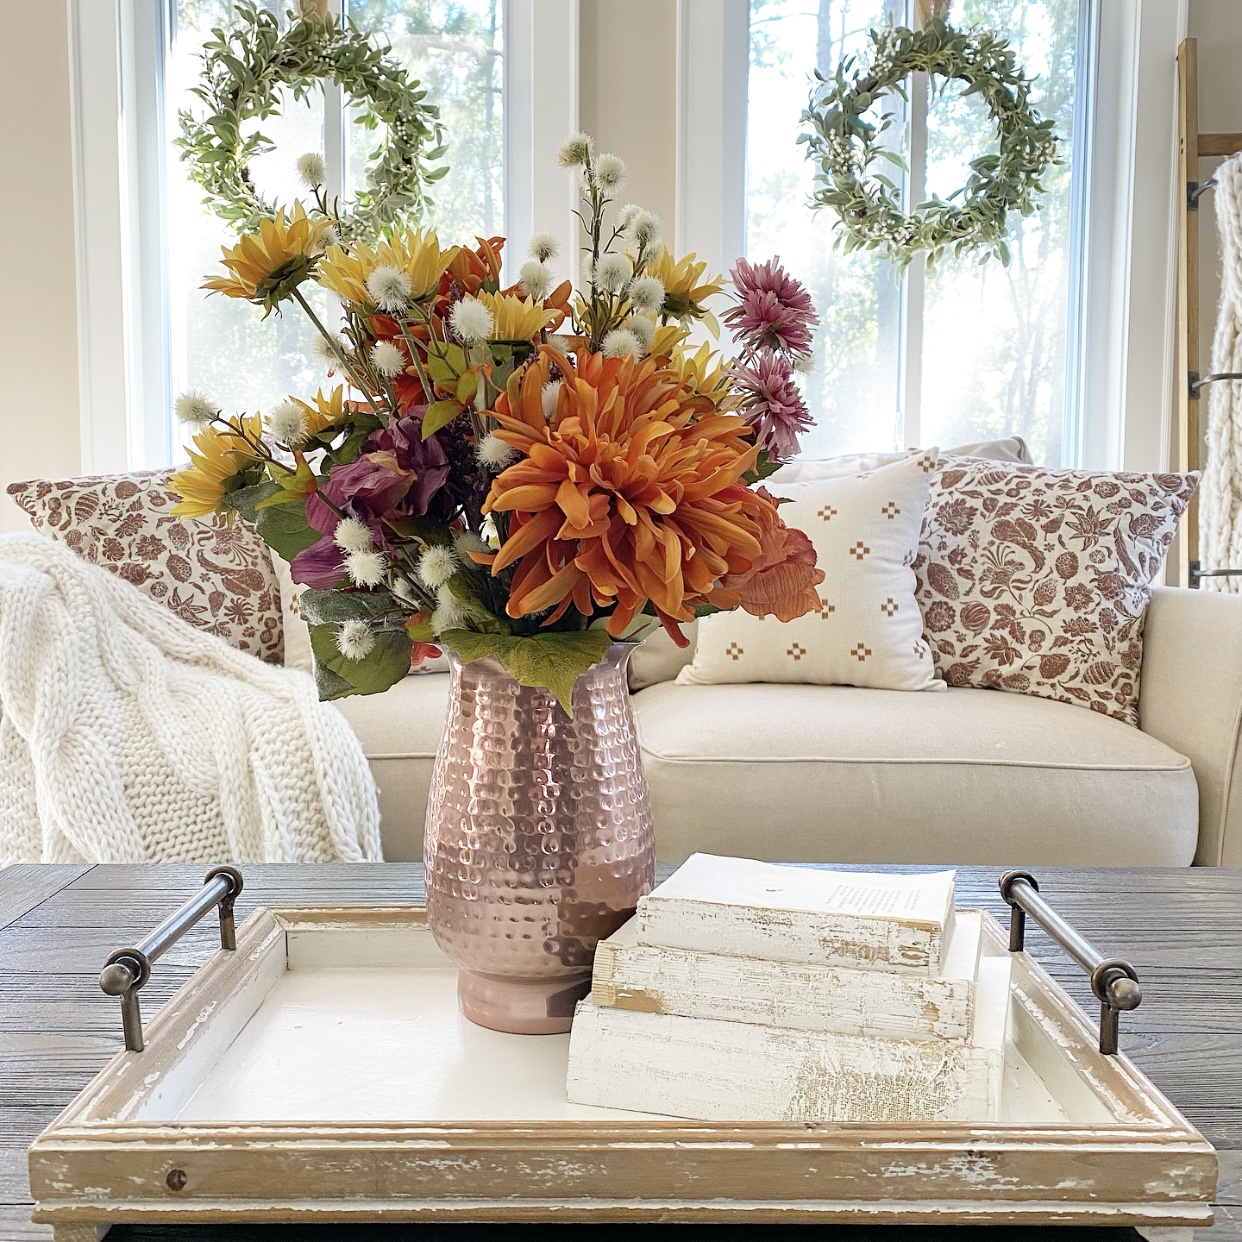 Copper pitcher filled with Fall florals and some vintage books stacked upon a tray on a coffee table. In the background is a sofa with Fall pillows on it and a cozy knit blanket. There are wreaths hanging from the windows.